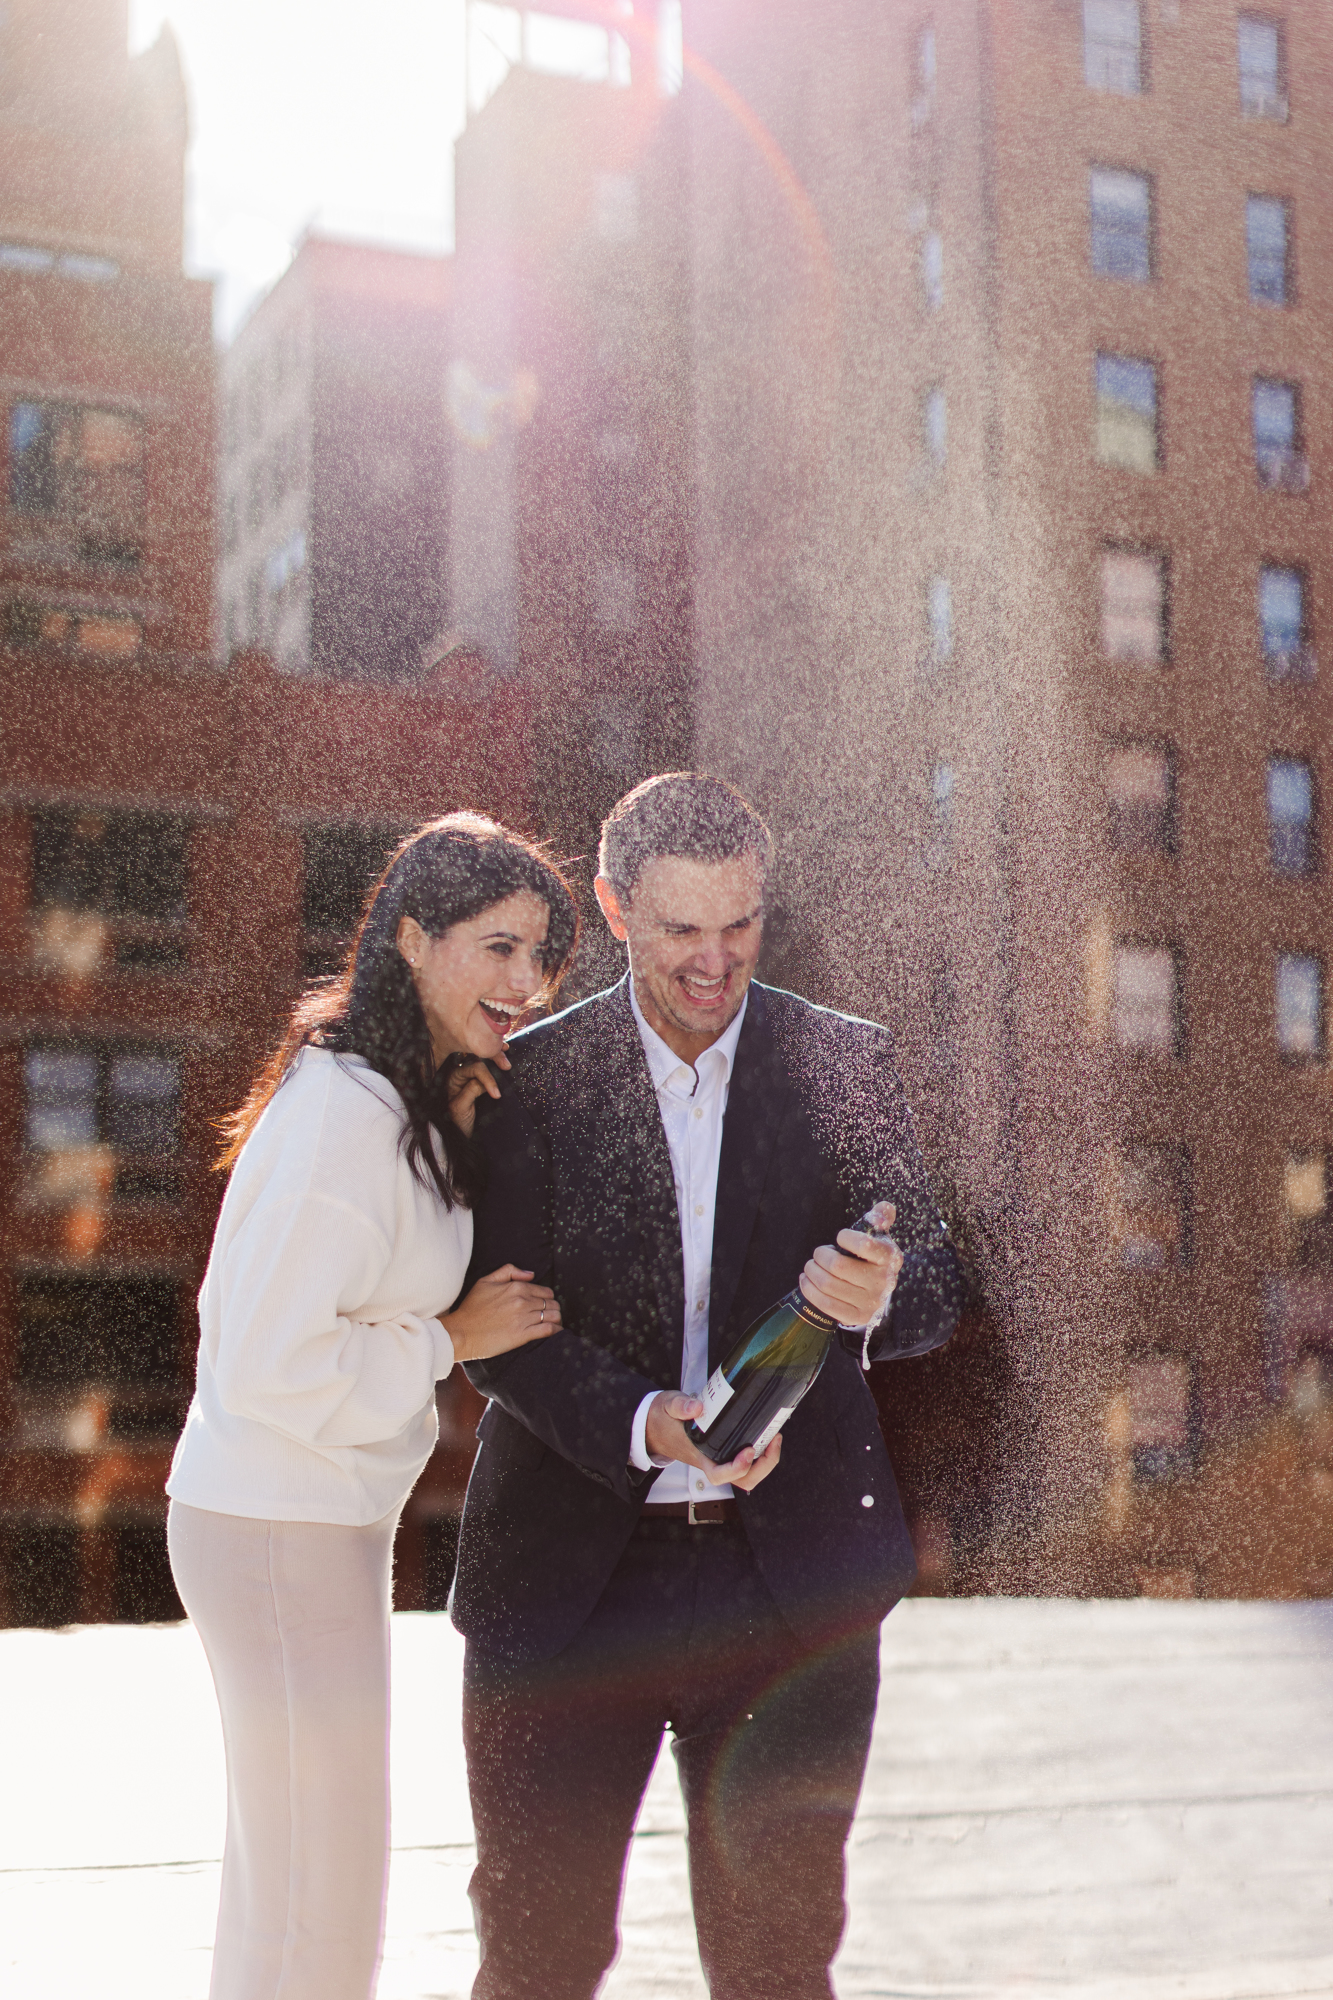 Unique Upper West Side Engagement Photo Shoot in NYC